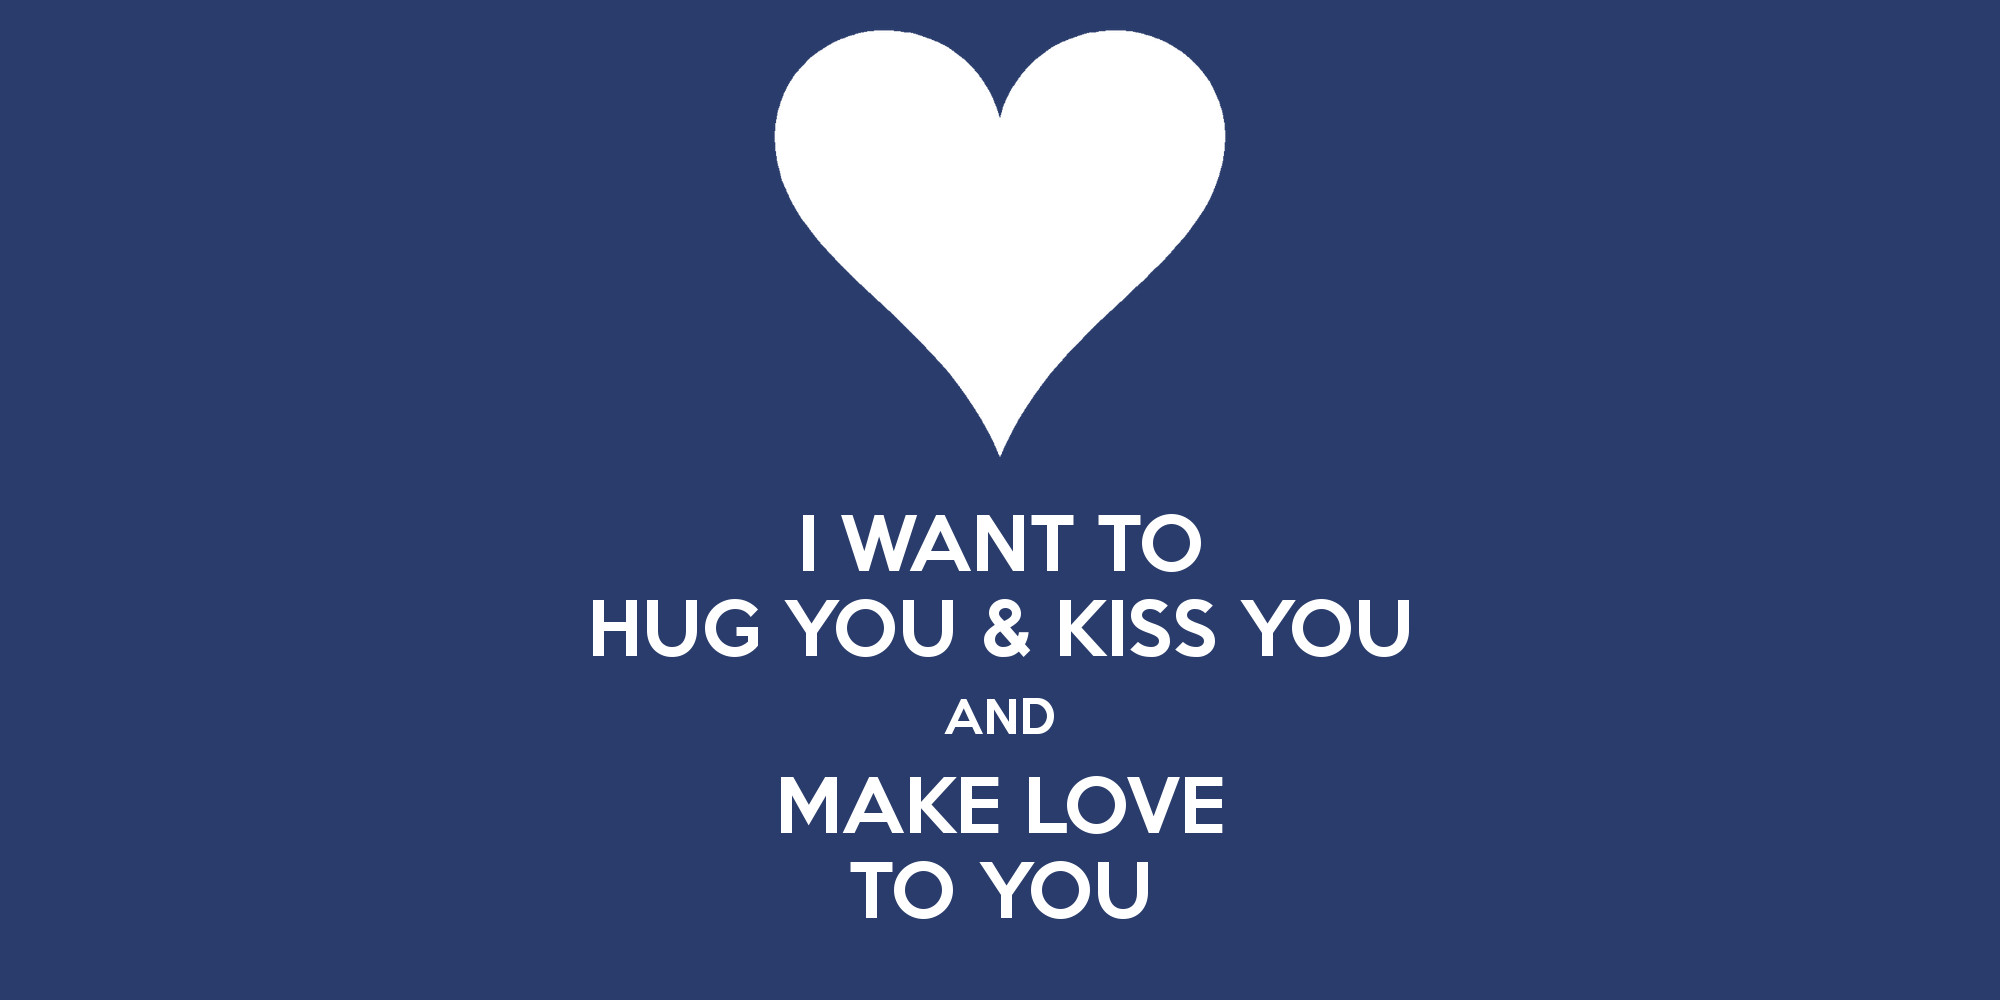 Making Love To You Quotes
 Hug Quotes and Hug Quotes with Message 4